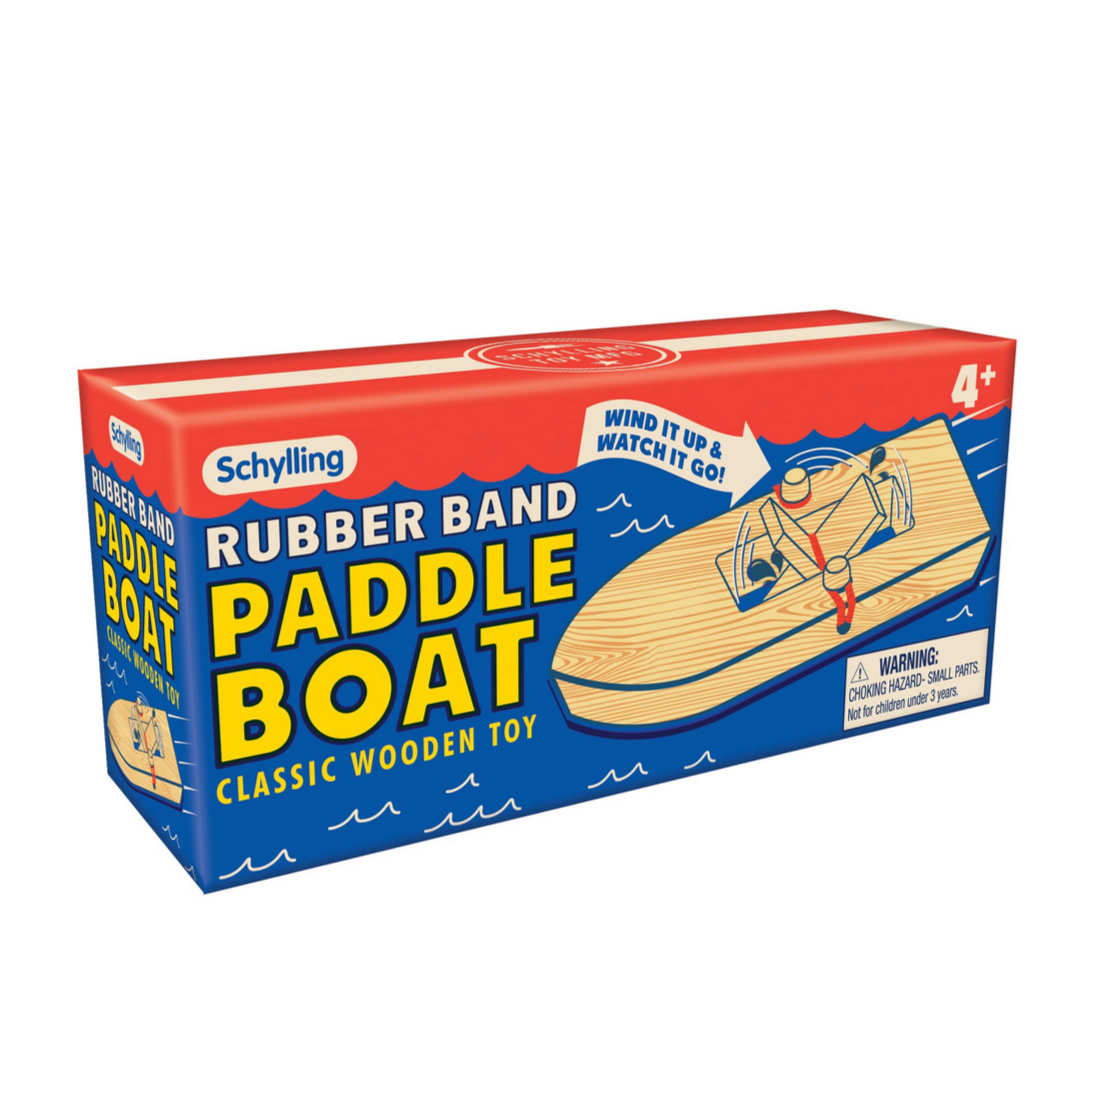 Paddle Boat Rubber Band 4yrs+